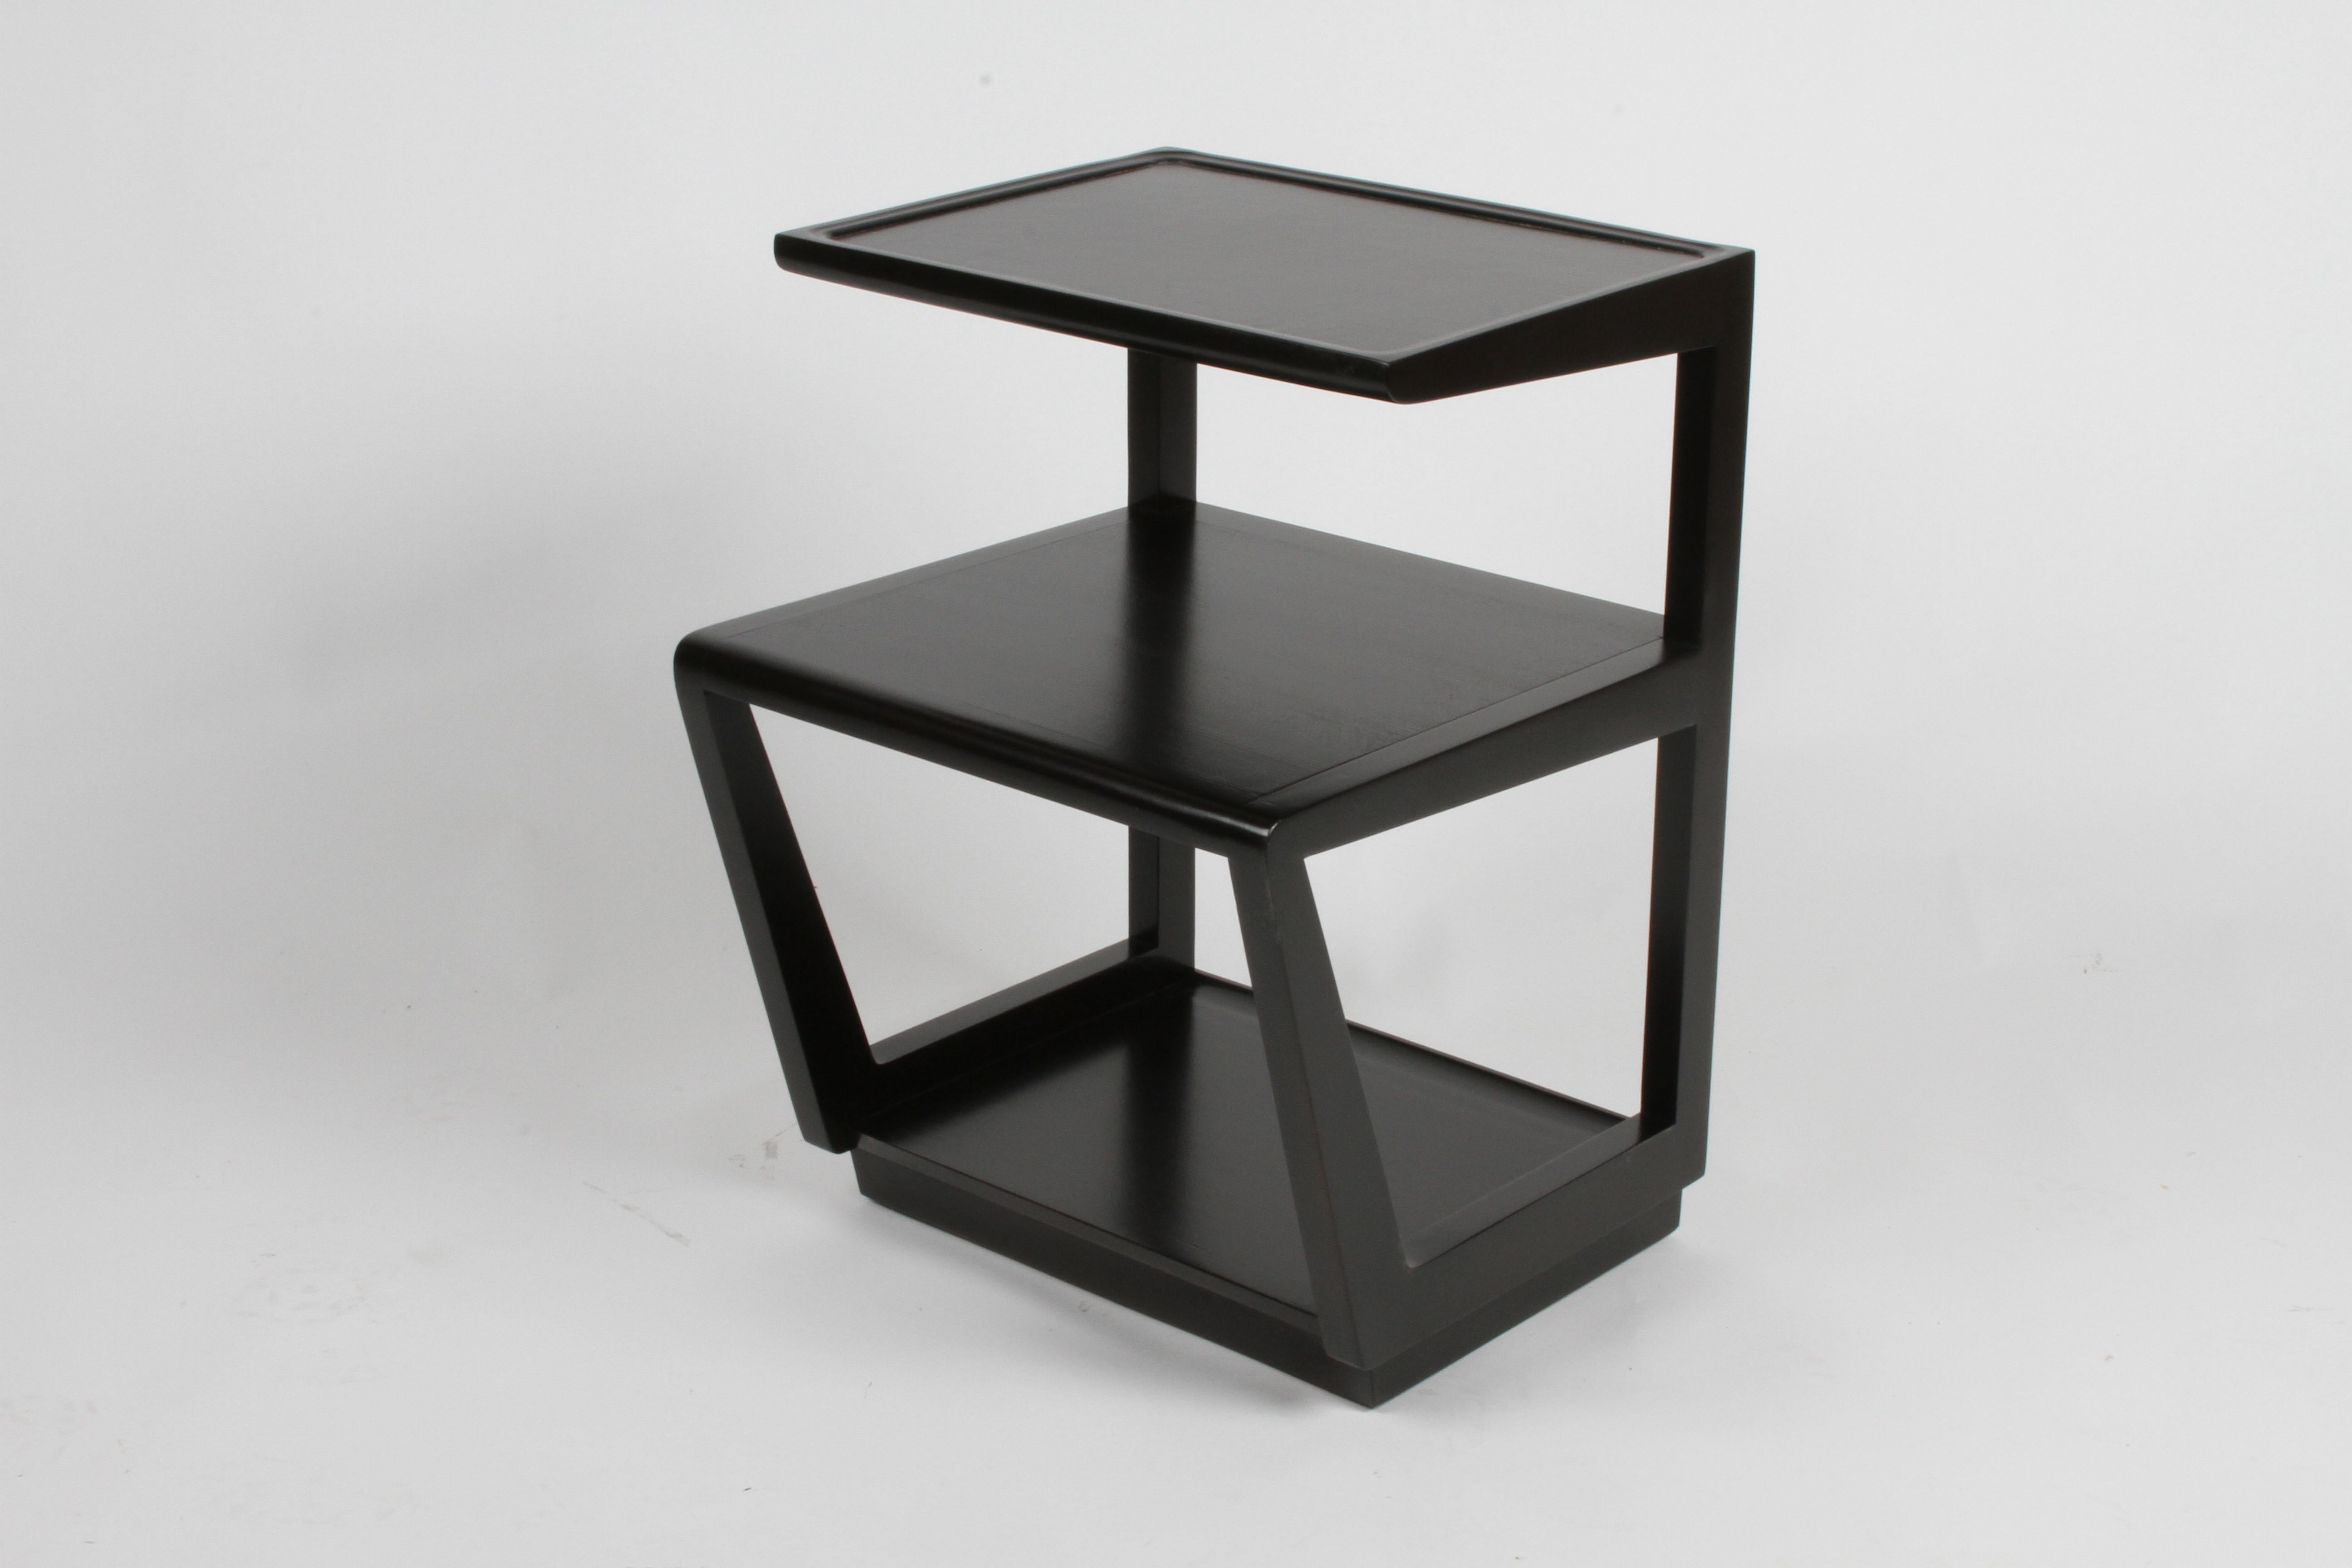 Pair of Drexel Precedent collection three-tiered end tables or nightstands designed by Edward Wormley, top shelf covered in leather, circa 1949. Silver elm is refinished in dark espresso. One table has the stencil to the underside, with